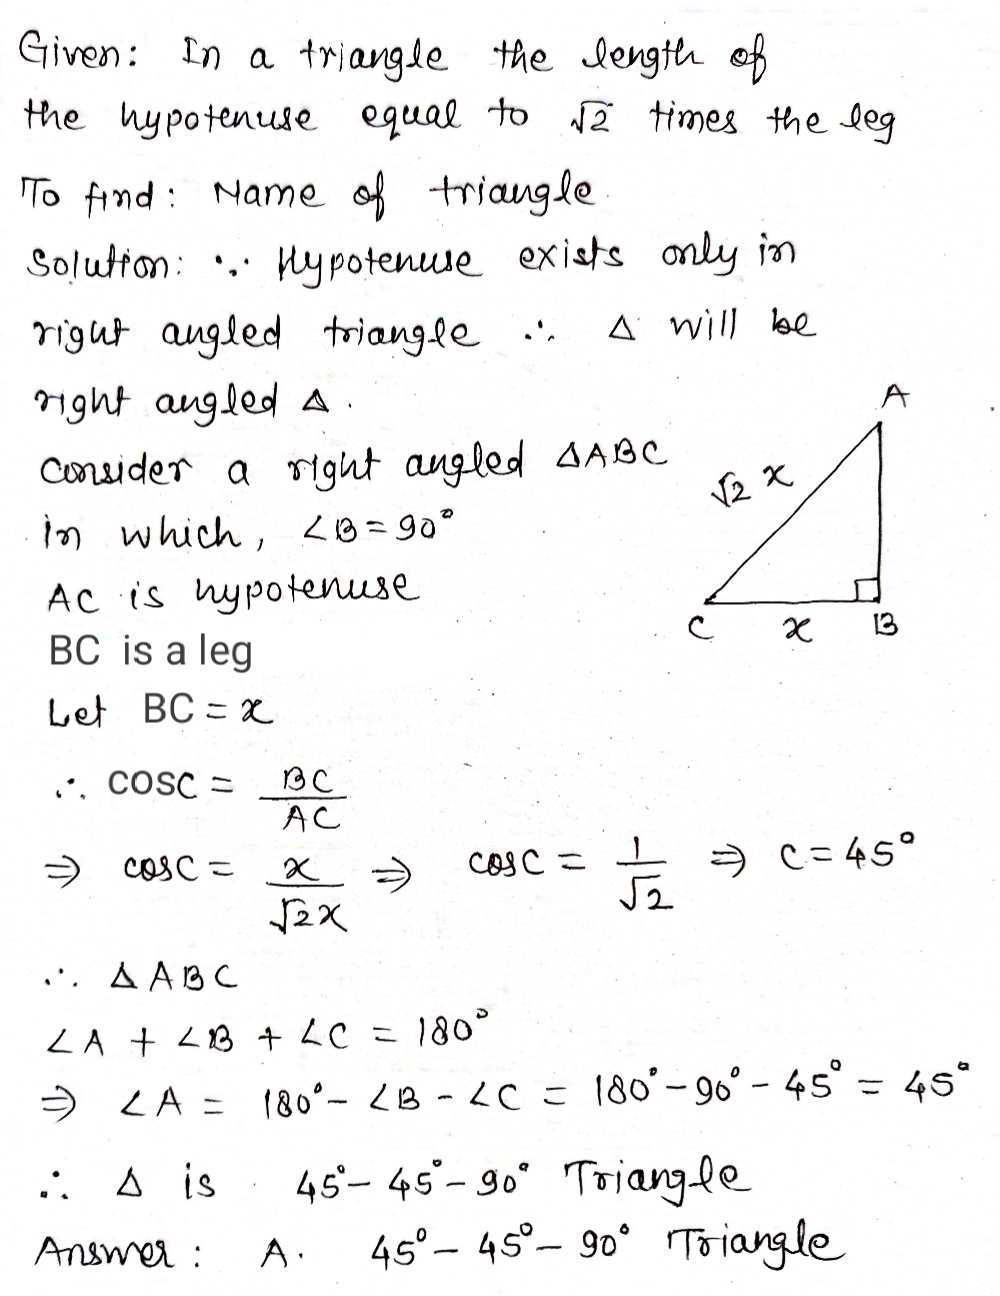 Triangle 40 50 90 What is